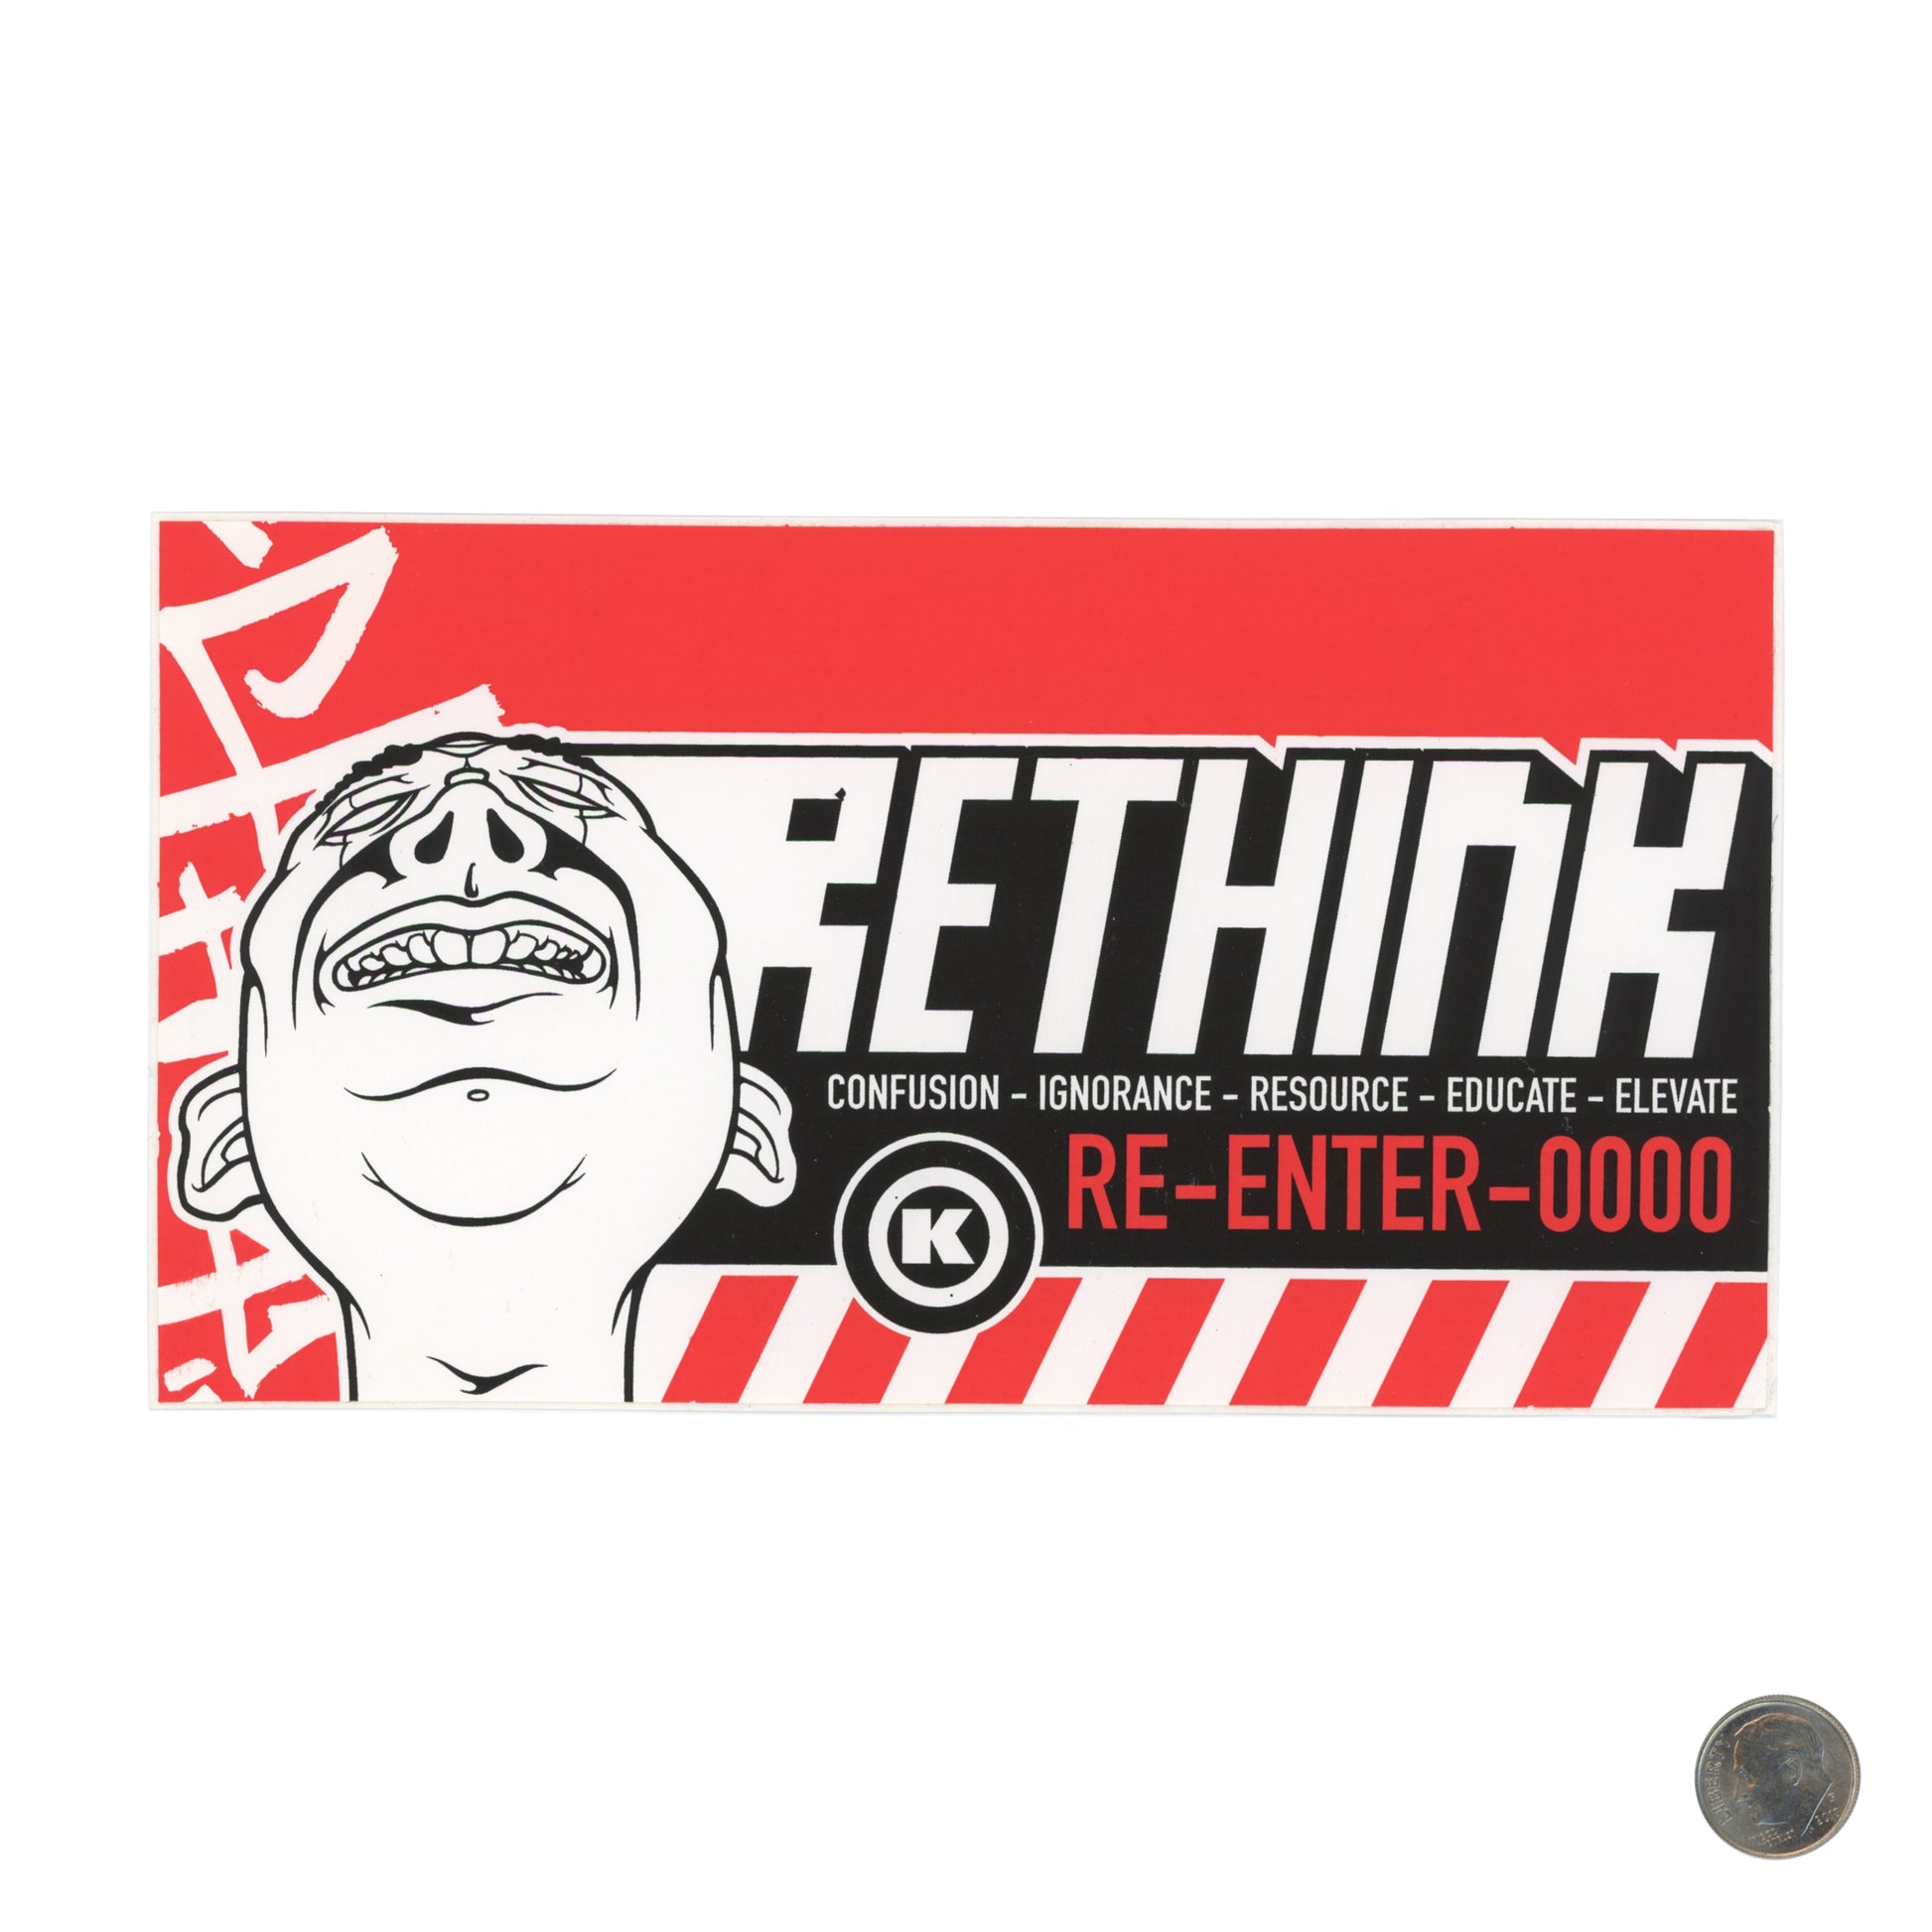 Dave Kinsey RETHINK RE-ENTER-000 Red Sticker with dime